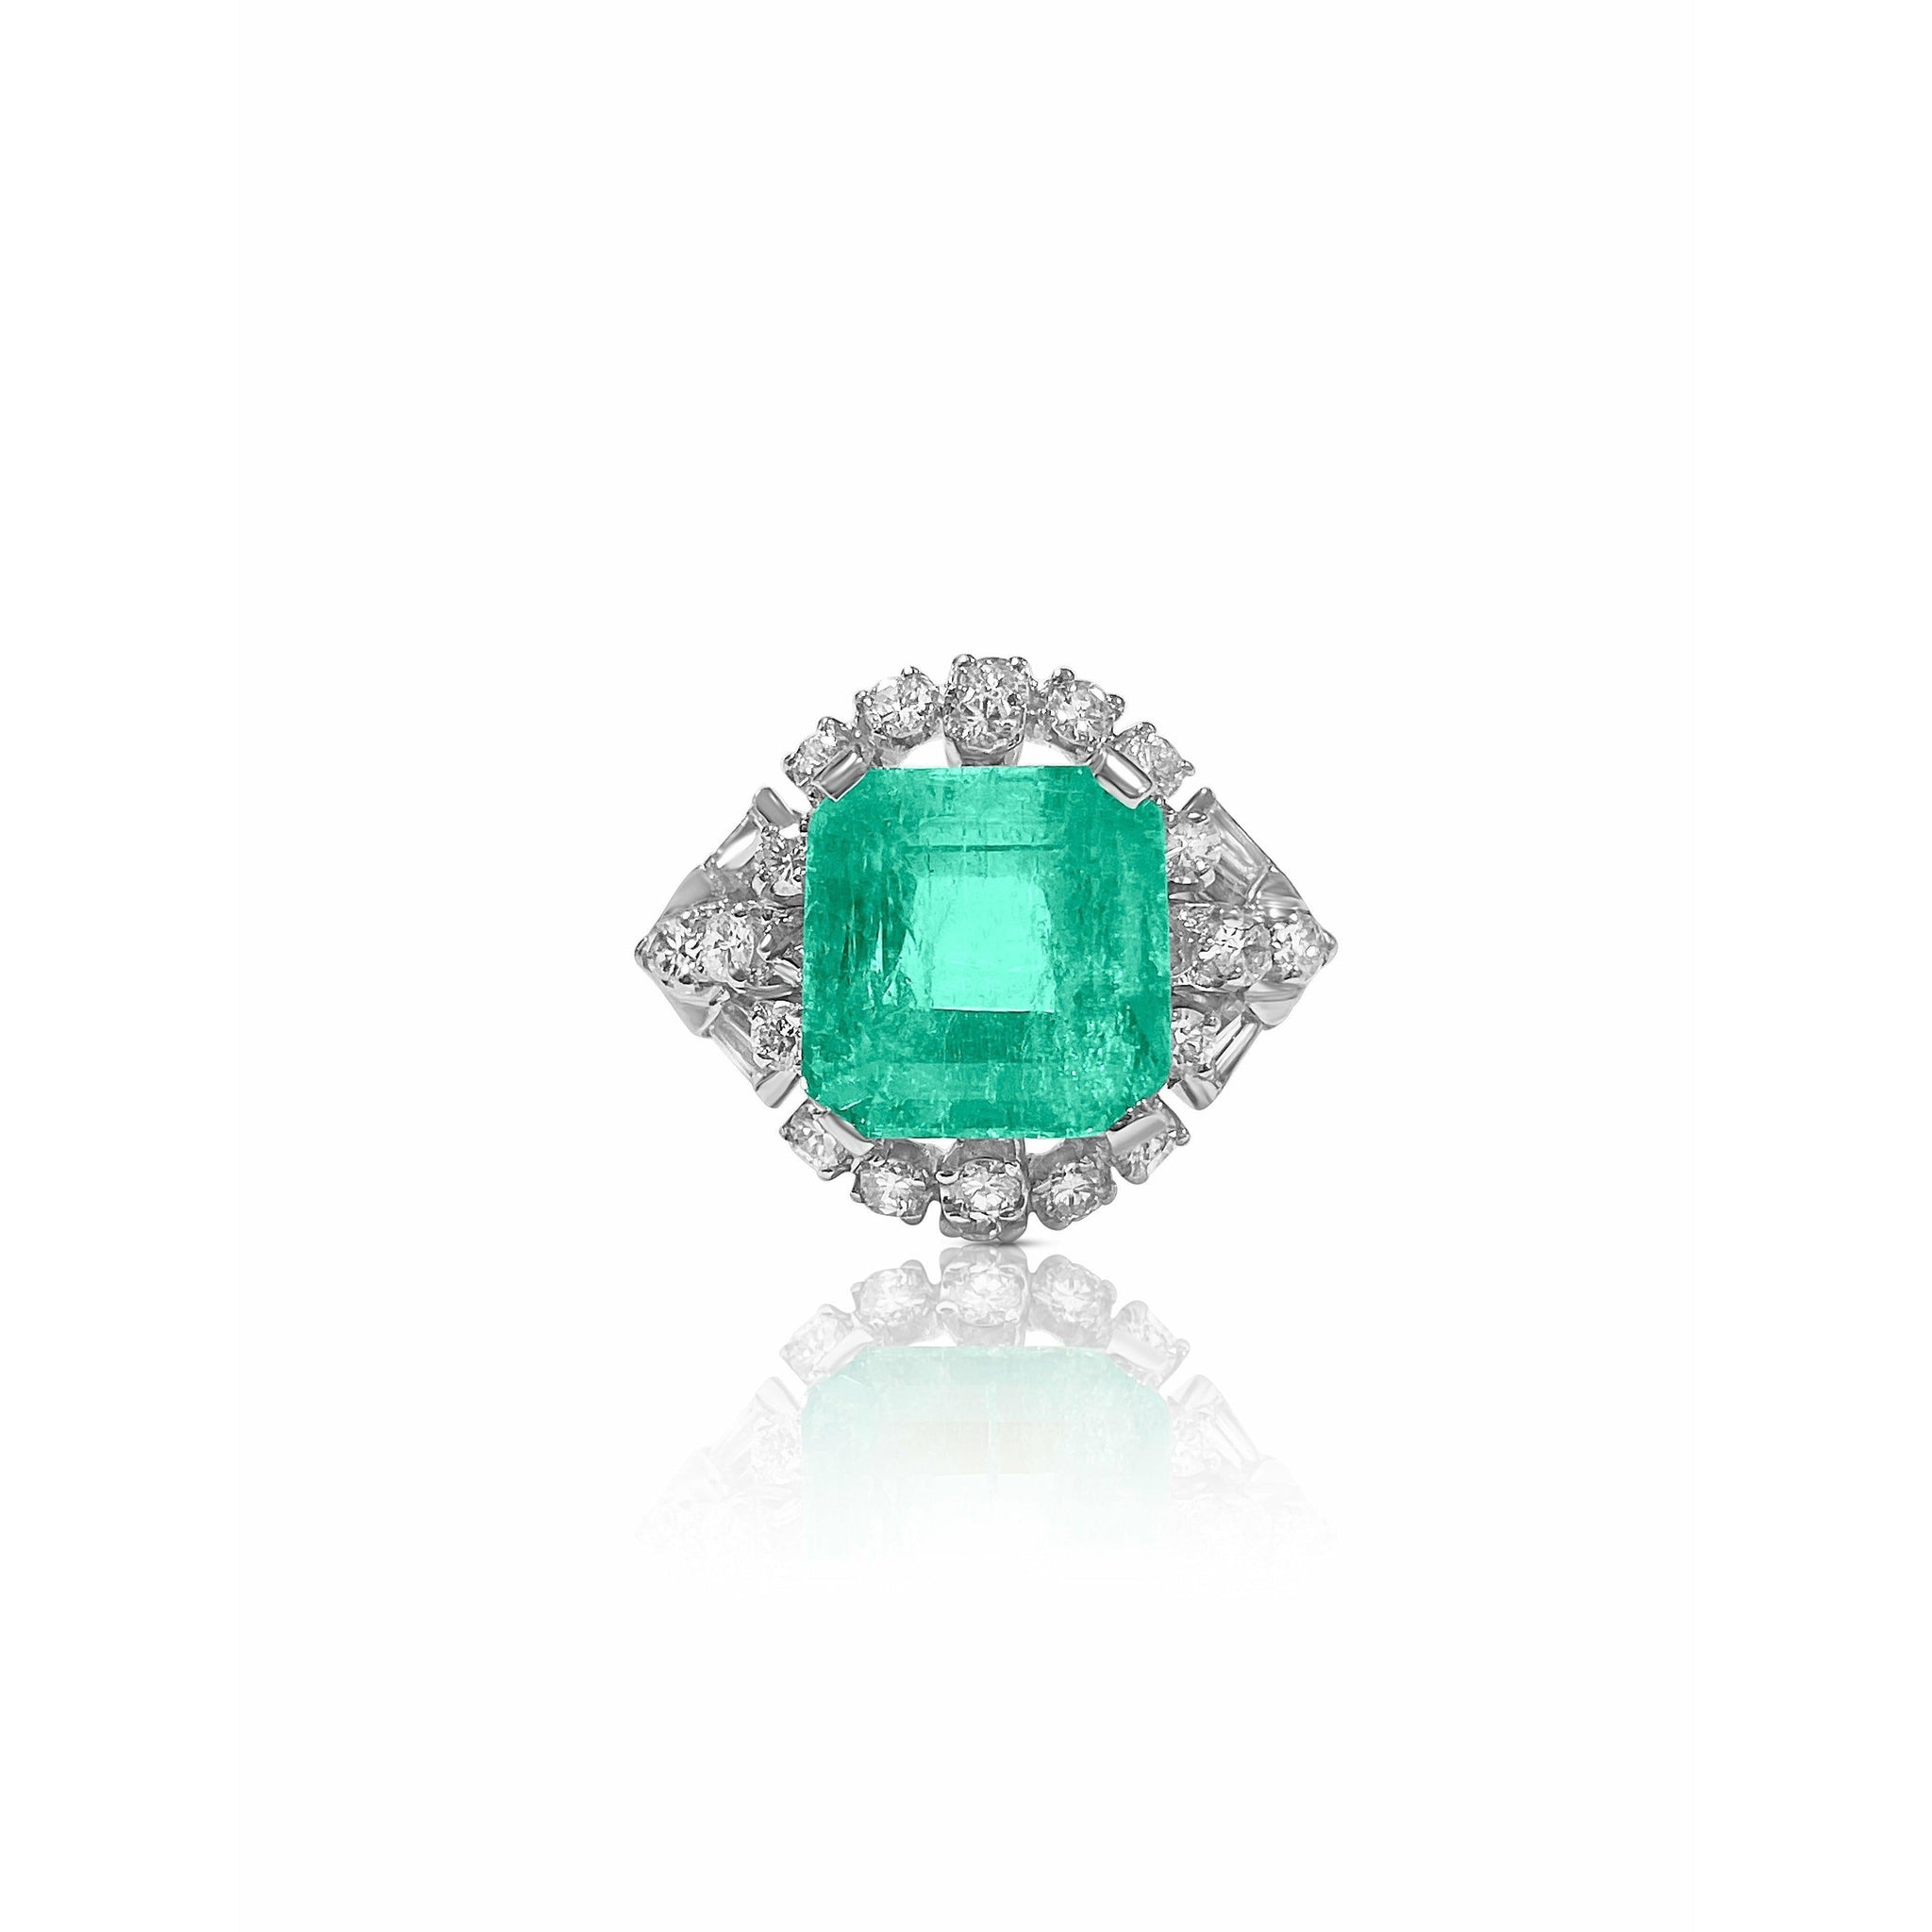 5.43 carat Colombian Emerald and Baguette Diamonds mounted in Platinum Ring - ASSAY